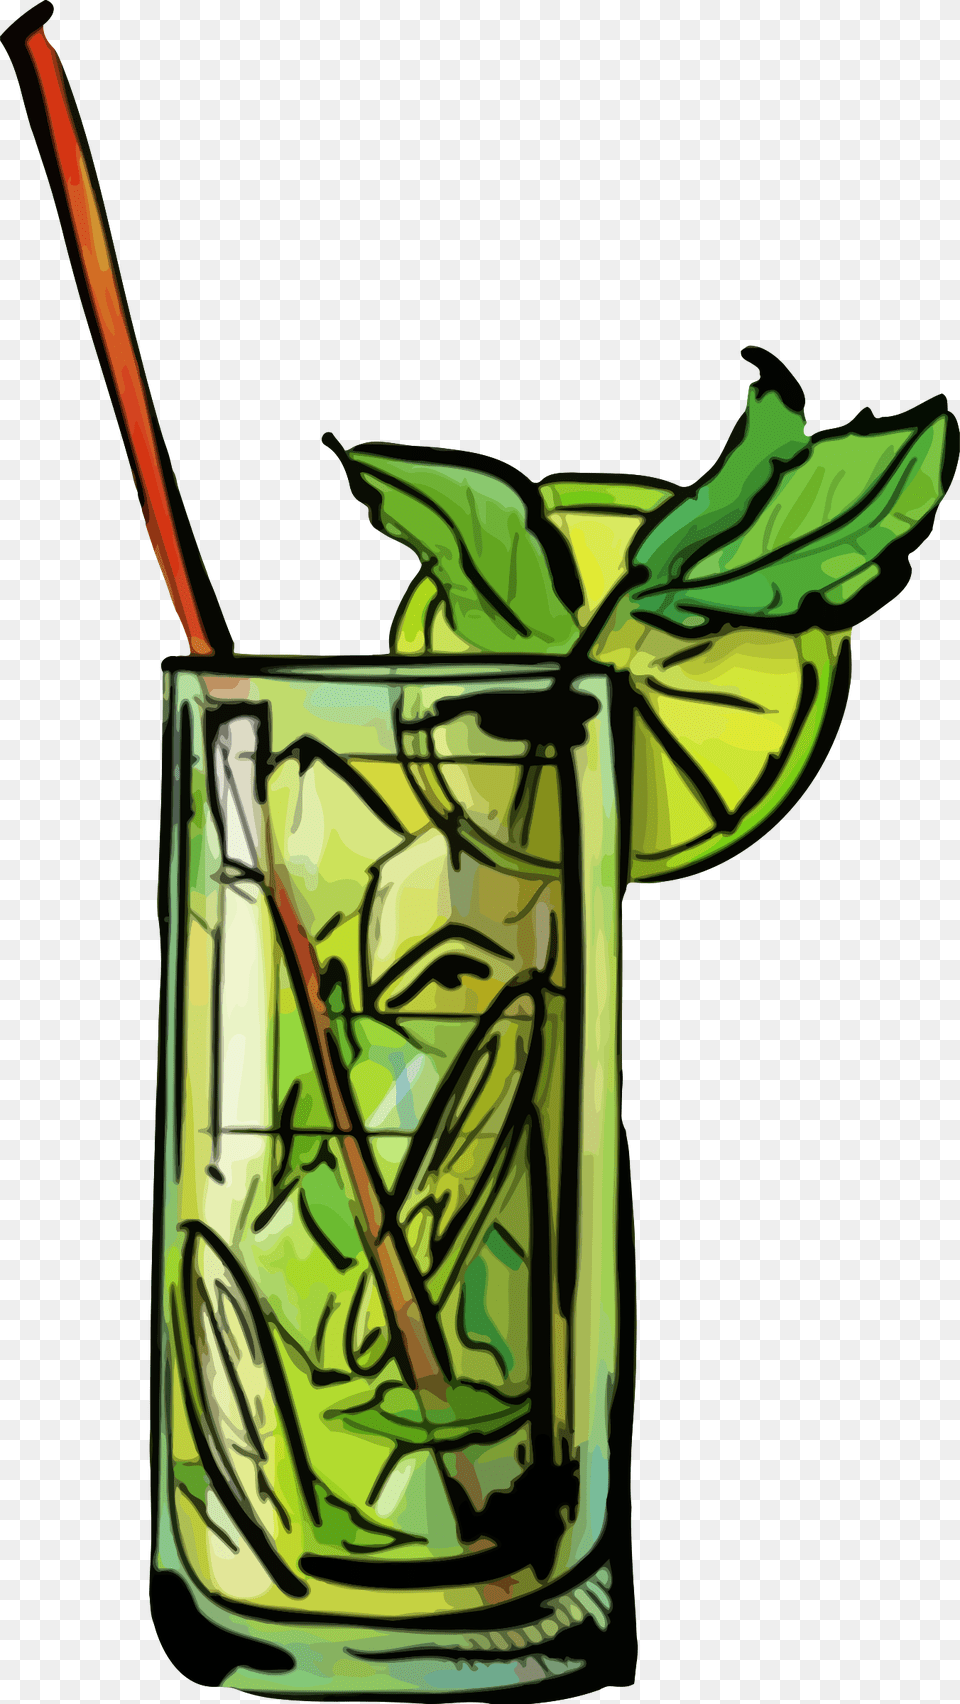 This Icons Design Of Mojito Cocktail, Alcohol, Beverage, Herbs, Mint Png Image